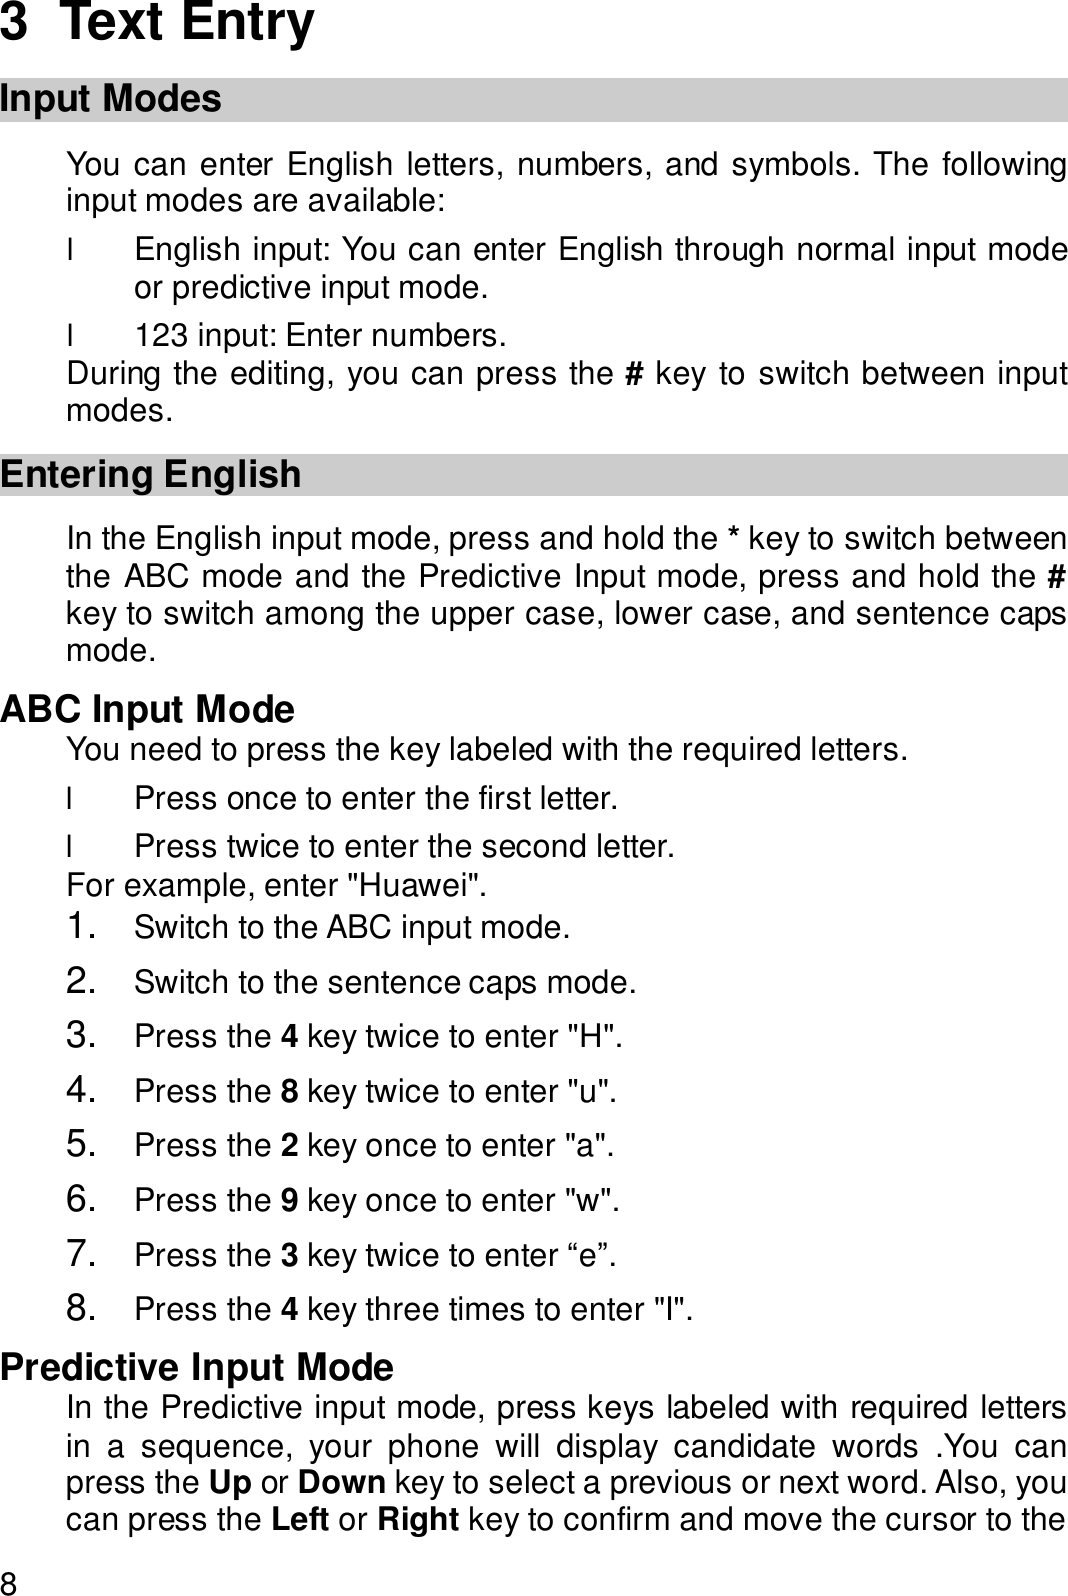  8 3  Text Entry Input Modes You can enter English letters, numbers, and symbols. The following input modes are available: l English input: You can enter English through normal input mode or predictive input mode. l 123 input: Enter numbers. During the editing, you can press the # key to switch between input modes. Entering English In the English input mode, press and hold the * key to switch between the ABC mode and the Predictive Input mode, press and hold the # key to switch among the upper case, lower case, and sentence caps mode. ABC Input Mode You need to press the key labeled with the required letters. l Press once to enter the first letter. l Press twice to enter the second letter. For example, enter &quot;Huawei&quot;. 1.  Switch to the ABC input mode. 2.  Switch to the sentence caps mode. 3.  Press the 4 key twice to enter &quot;H&quot;. 4.  Press the 8 key twice to enter &quot;u&quot;. 5.  Press the 2 key once to enter &quot;a&quot;. 6.  Press the 9 key once to enter &quot;w&quot;. 7.  Press the 3 key twice to enter “e”. 8.  Press the 4 key three times to enter &quot;I&quot;. Predictive Input Mode In the Predictive input mode, press keys labeled with required letters in a sequence, your phone will display candidate words .You can press the Up or Down key to select a previous or next word. Also, you can press the Left or Right key to confirm and move the cursor to the 